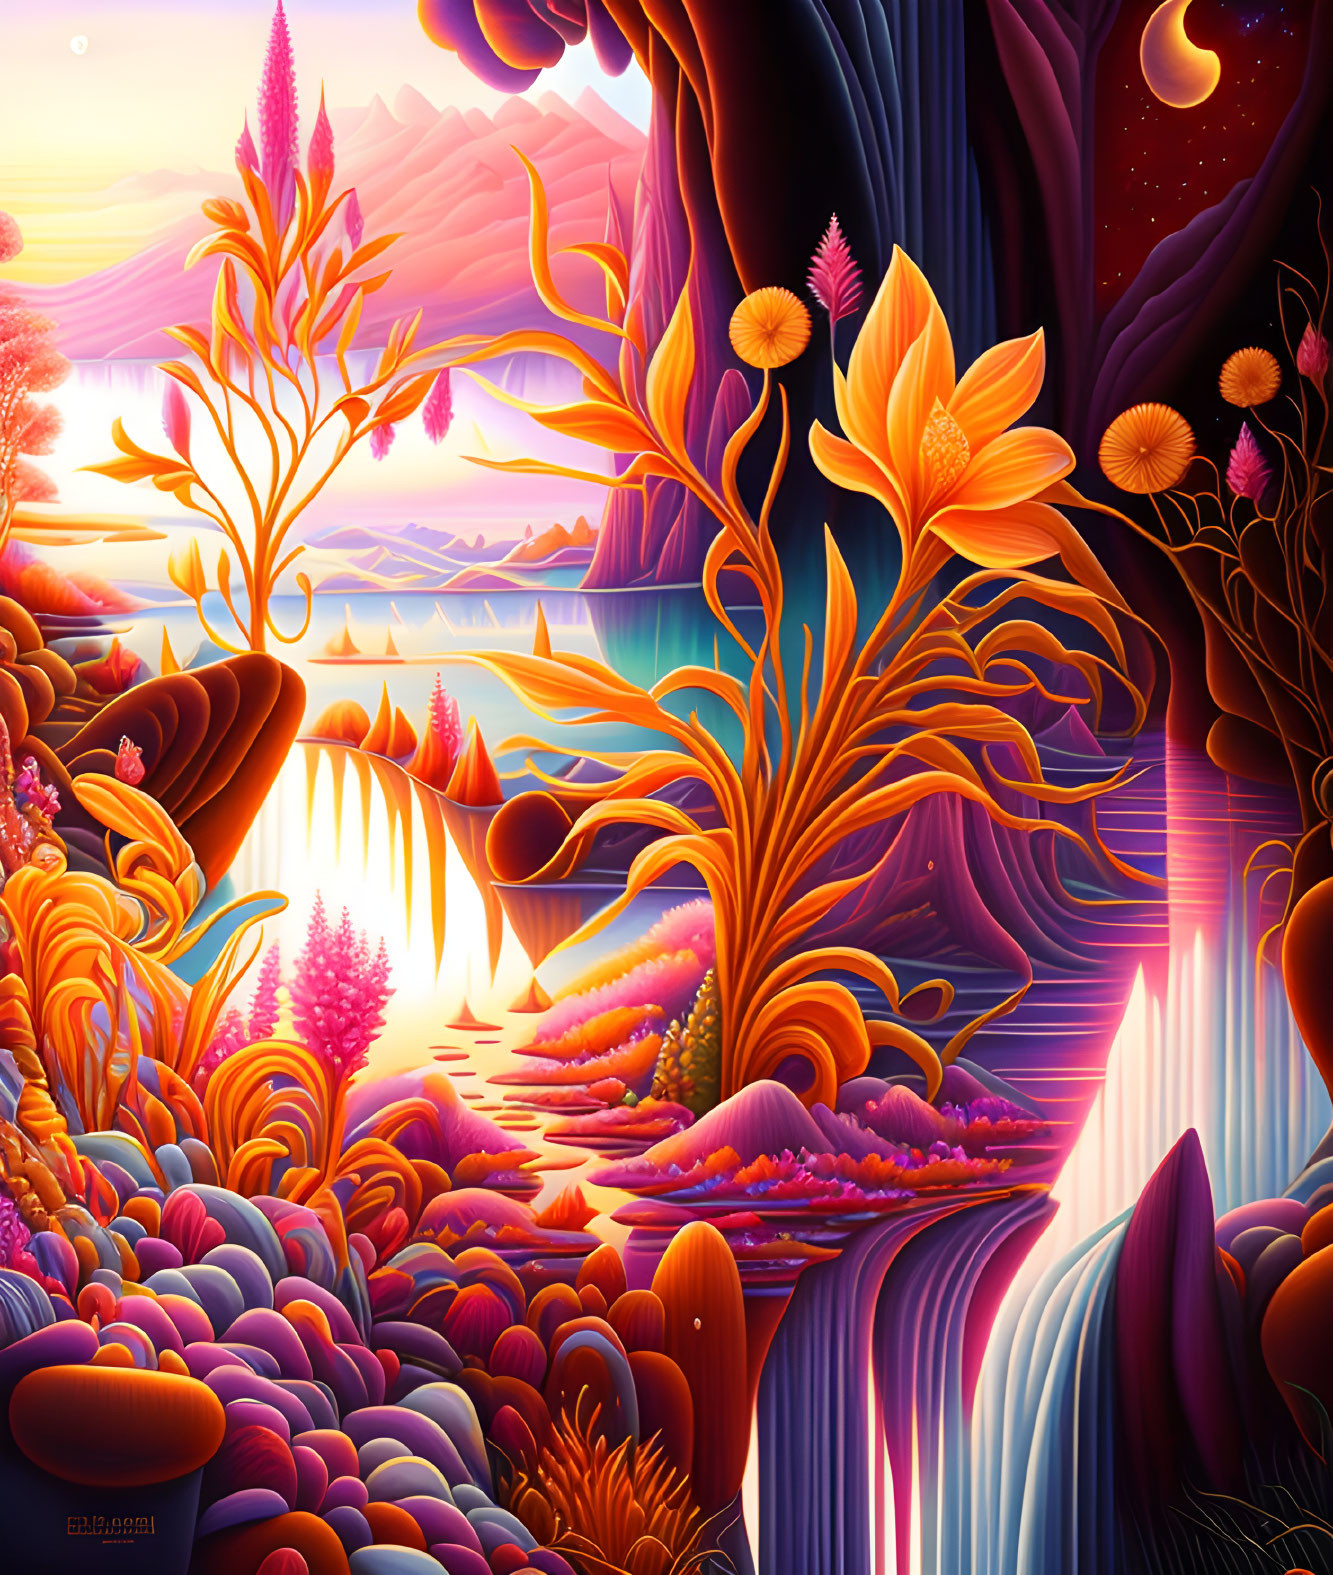 Surreal landscape with vibrant plant life under starry sky